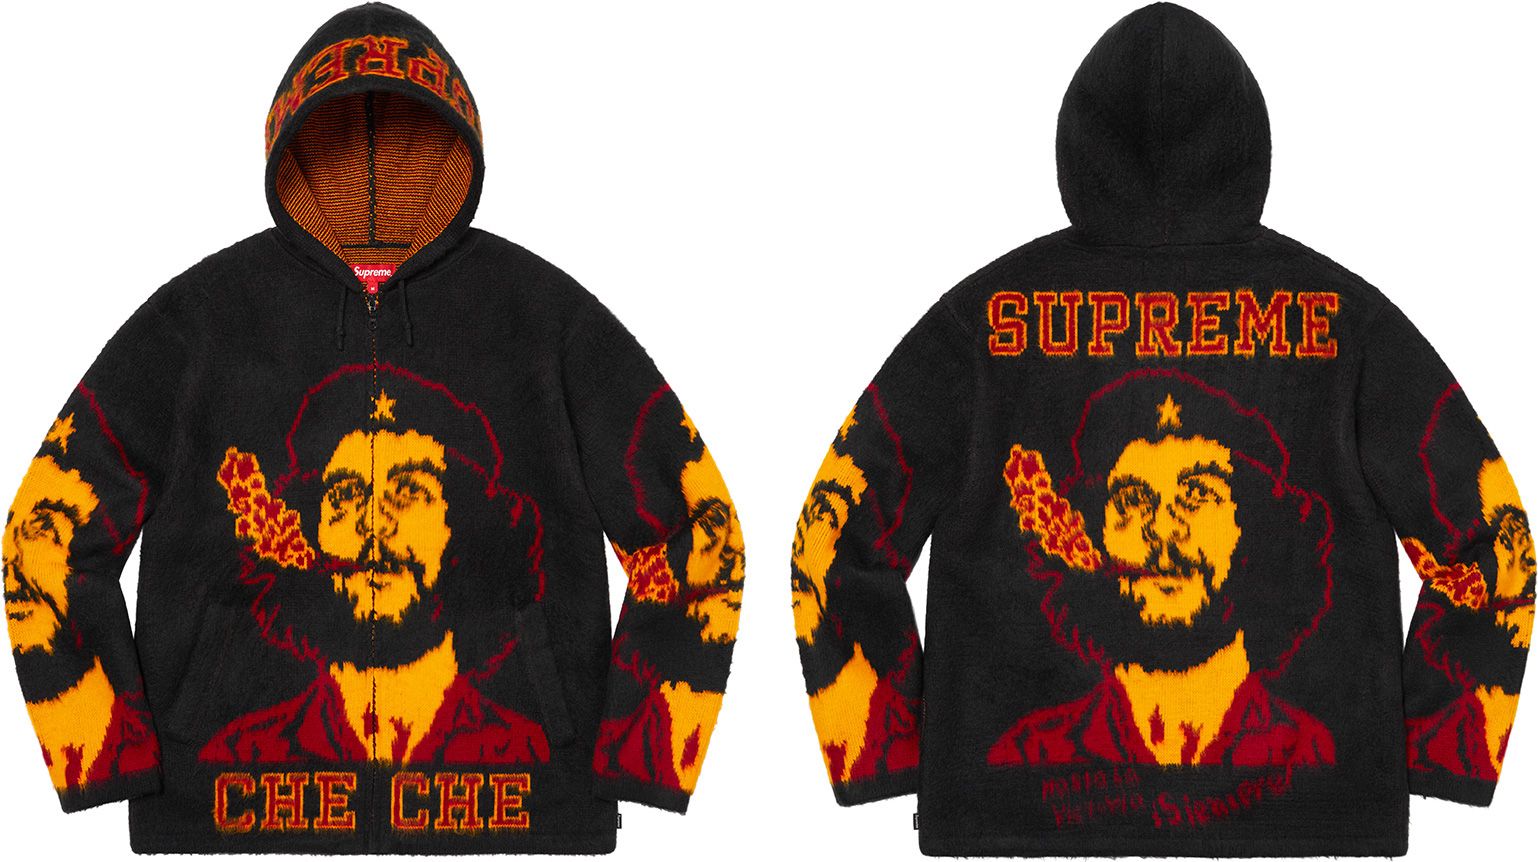 Jamie Reid Fuck All Sweater - Spring/Summer 2021 Preview – Supreme